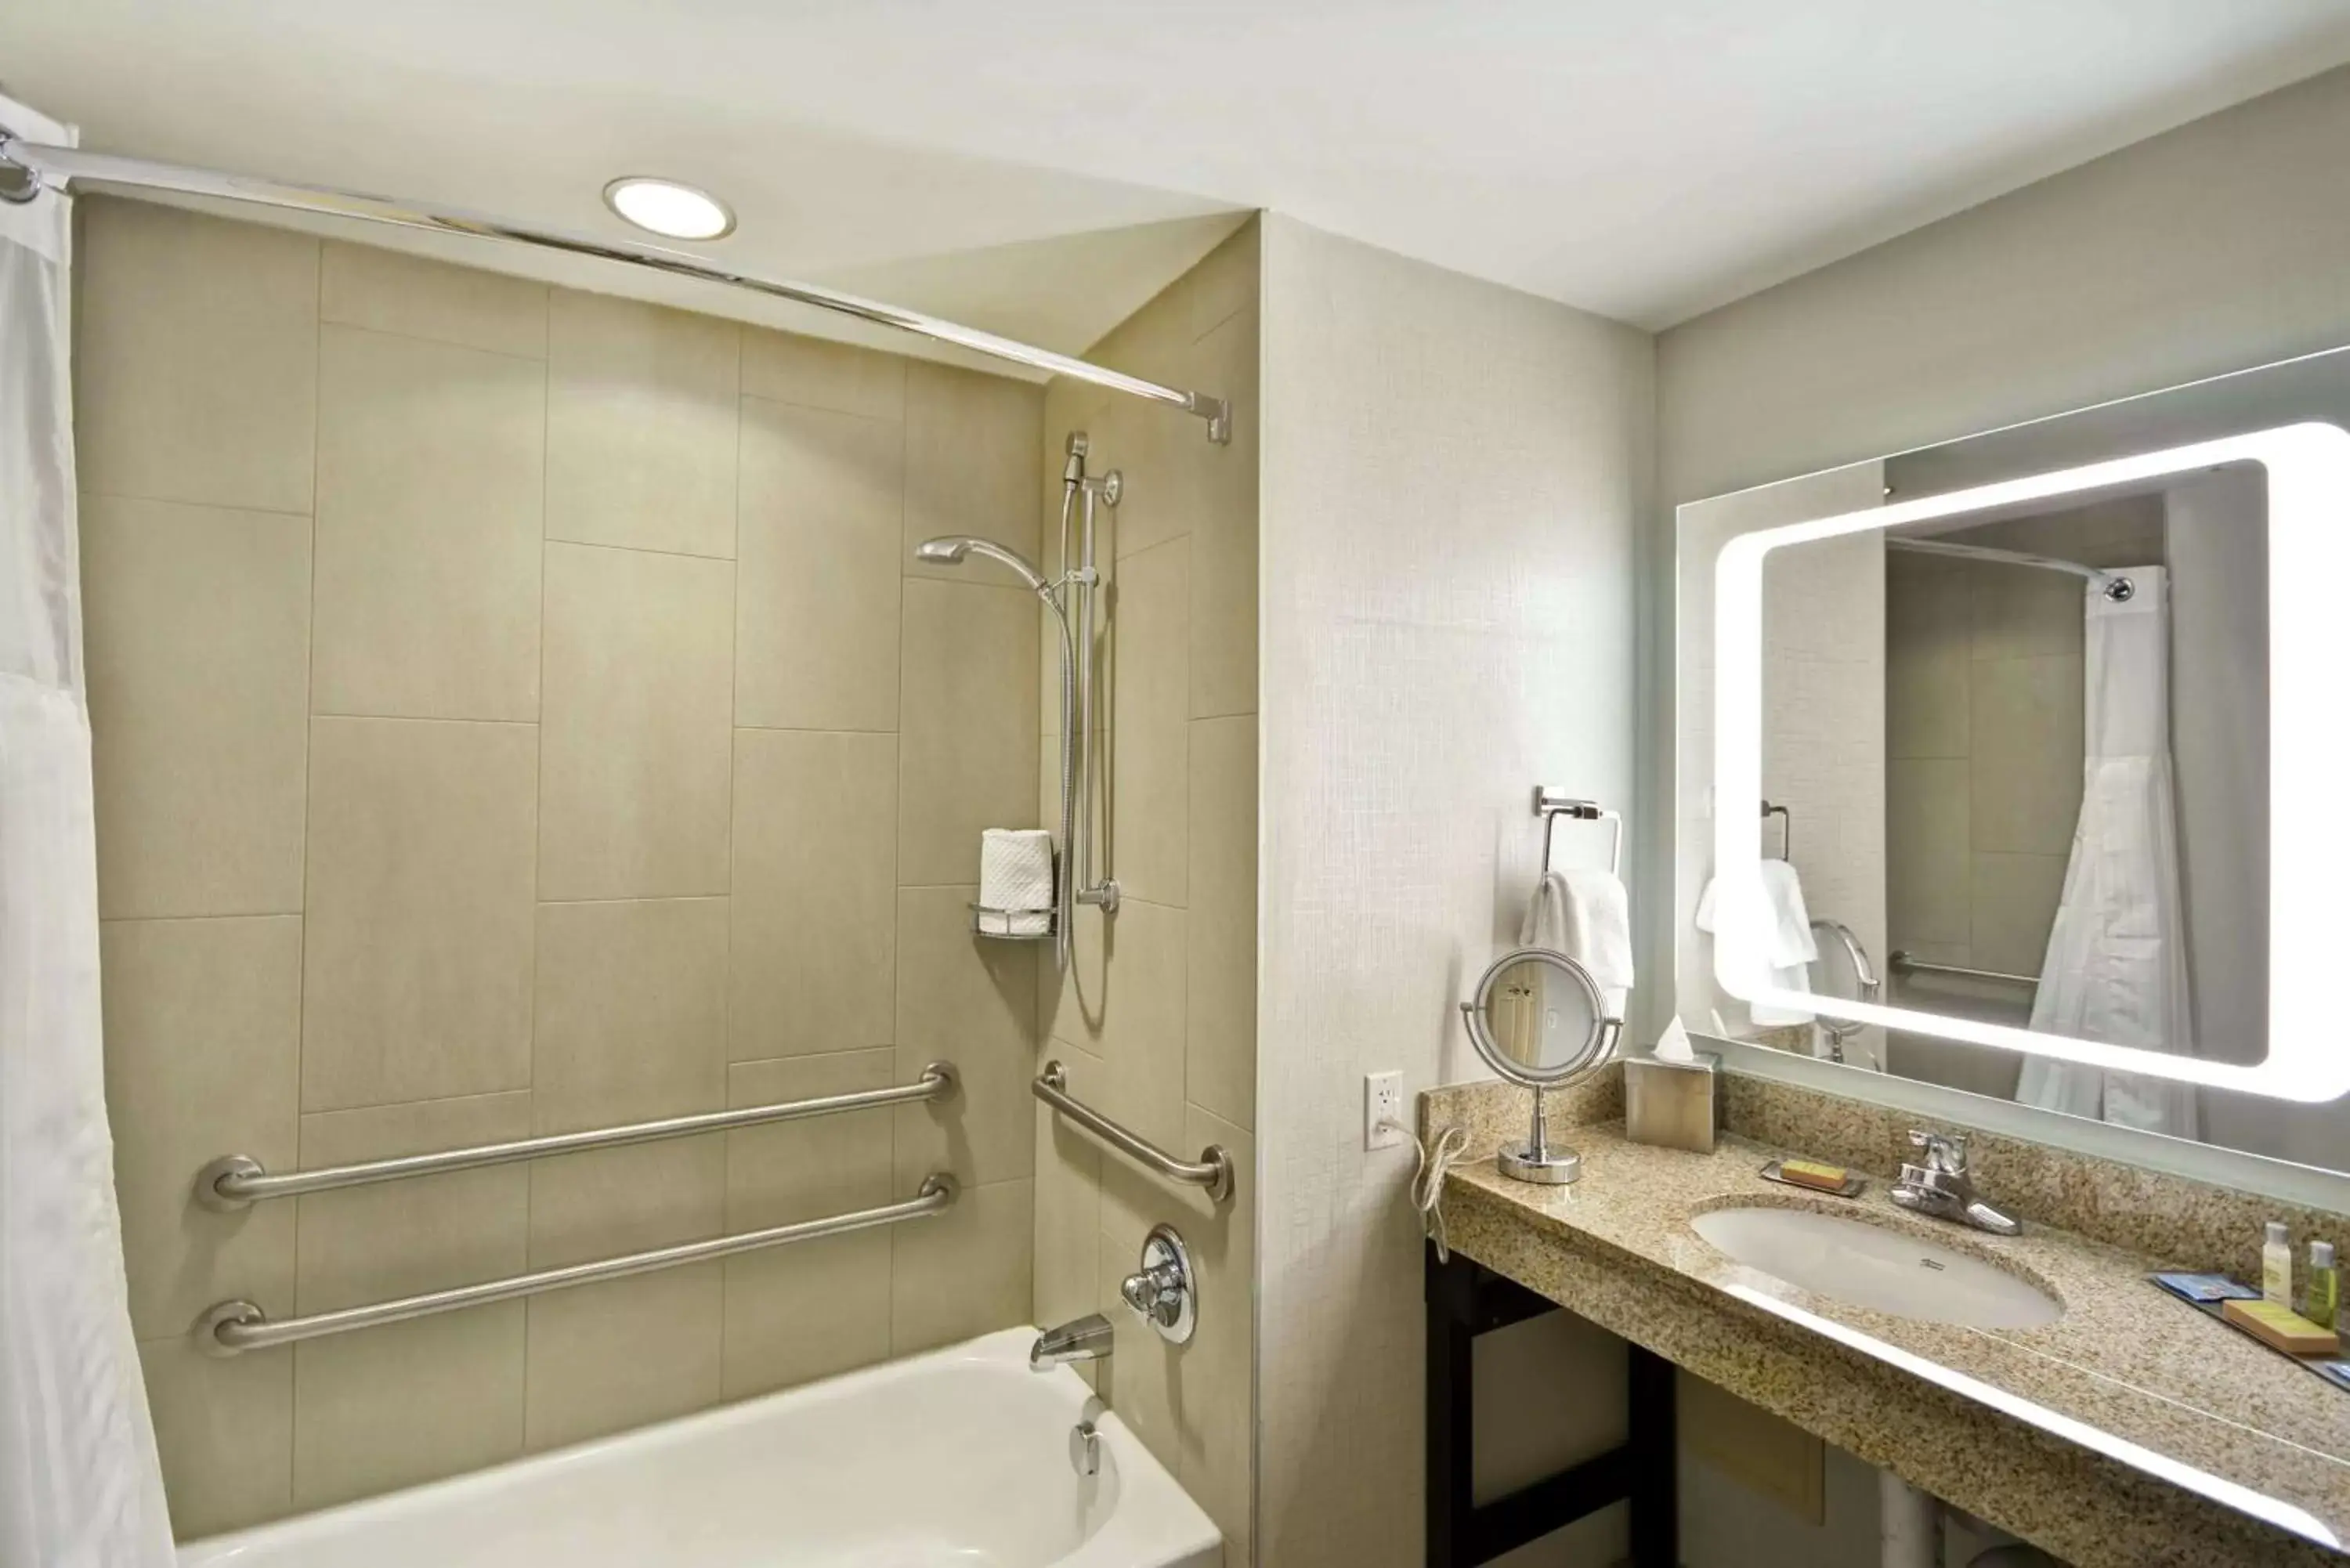 Bathroom in DoubleTree by Hilton Chicago Midway Airport, IL